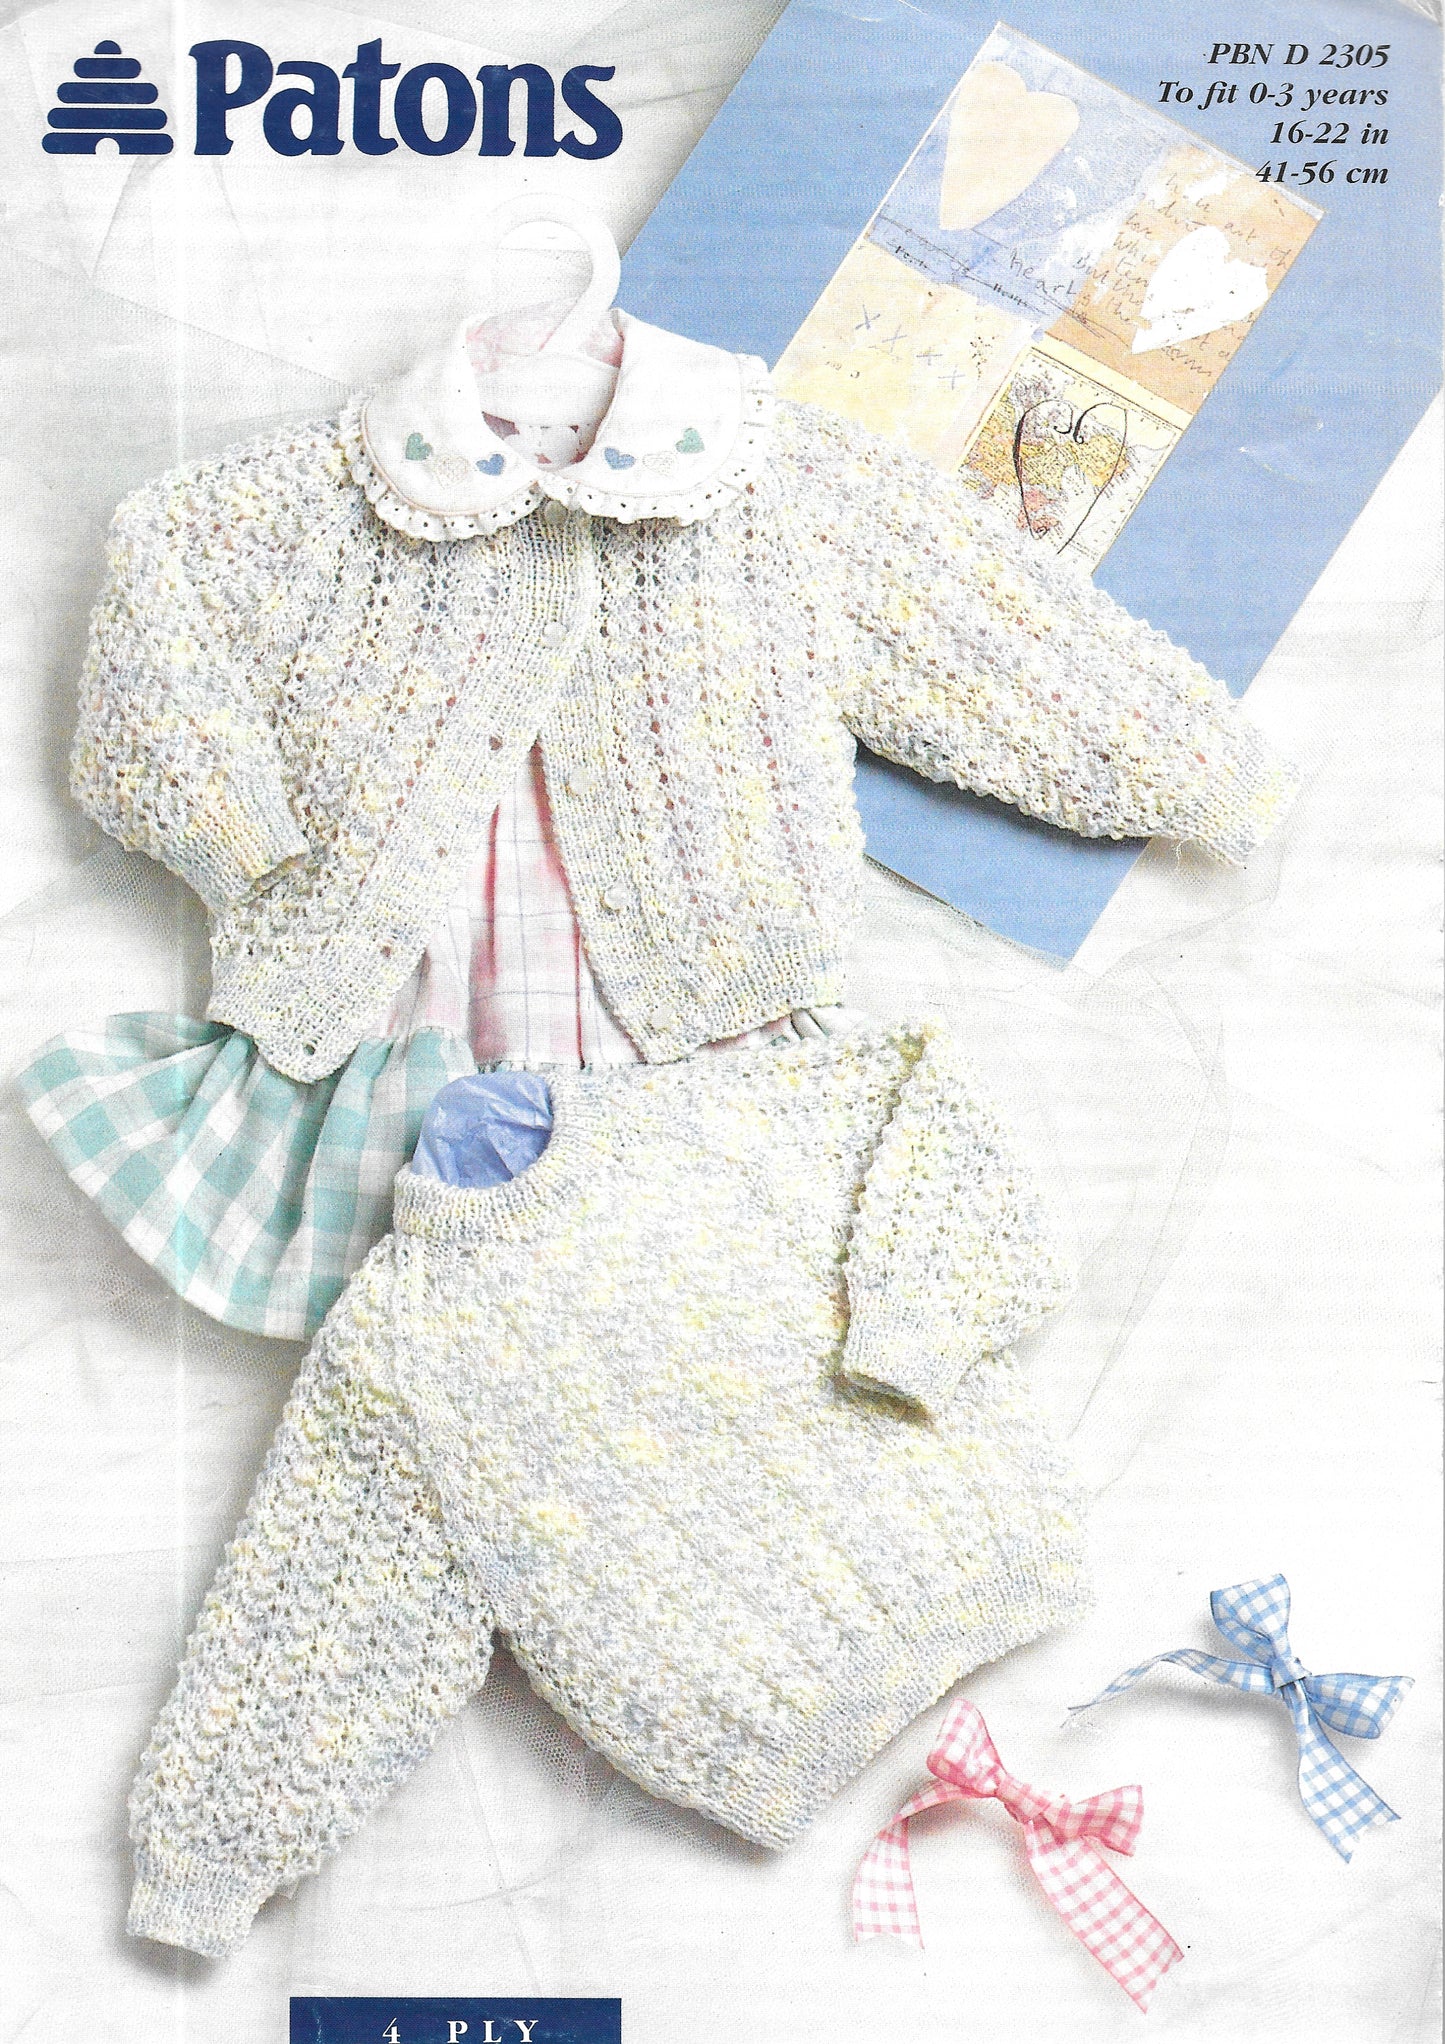 D2305 PRELOVED Patons Knitting Pattern. Child's cardigan/sweater. 4 ply 16-22"